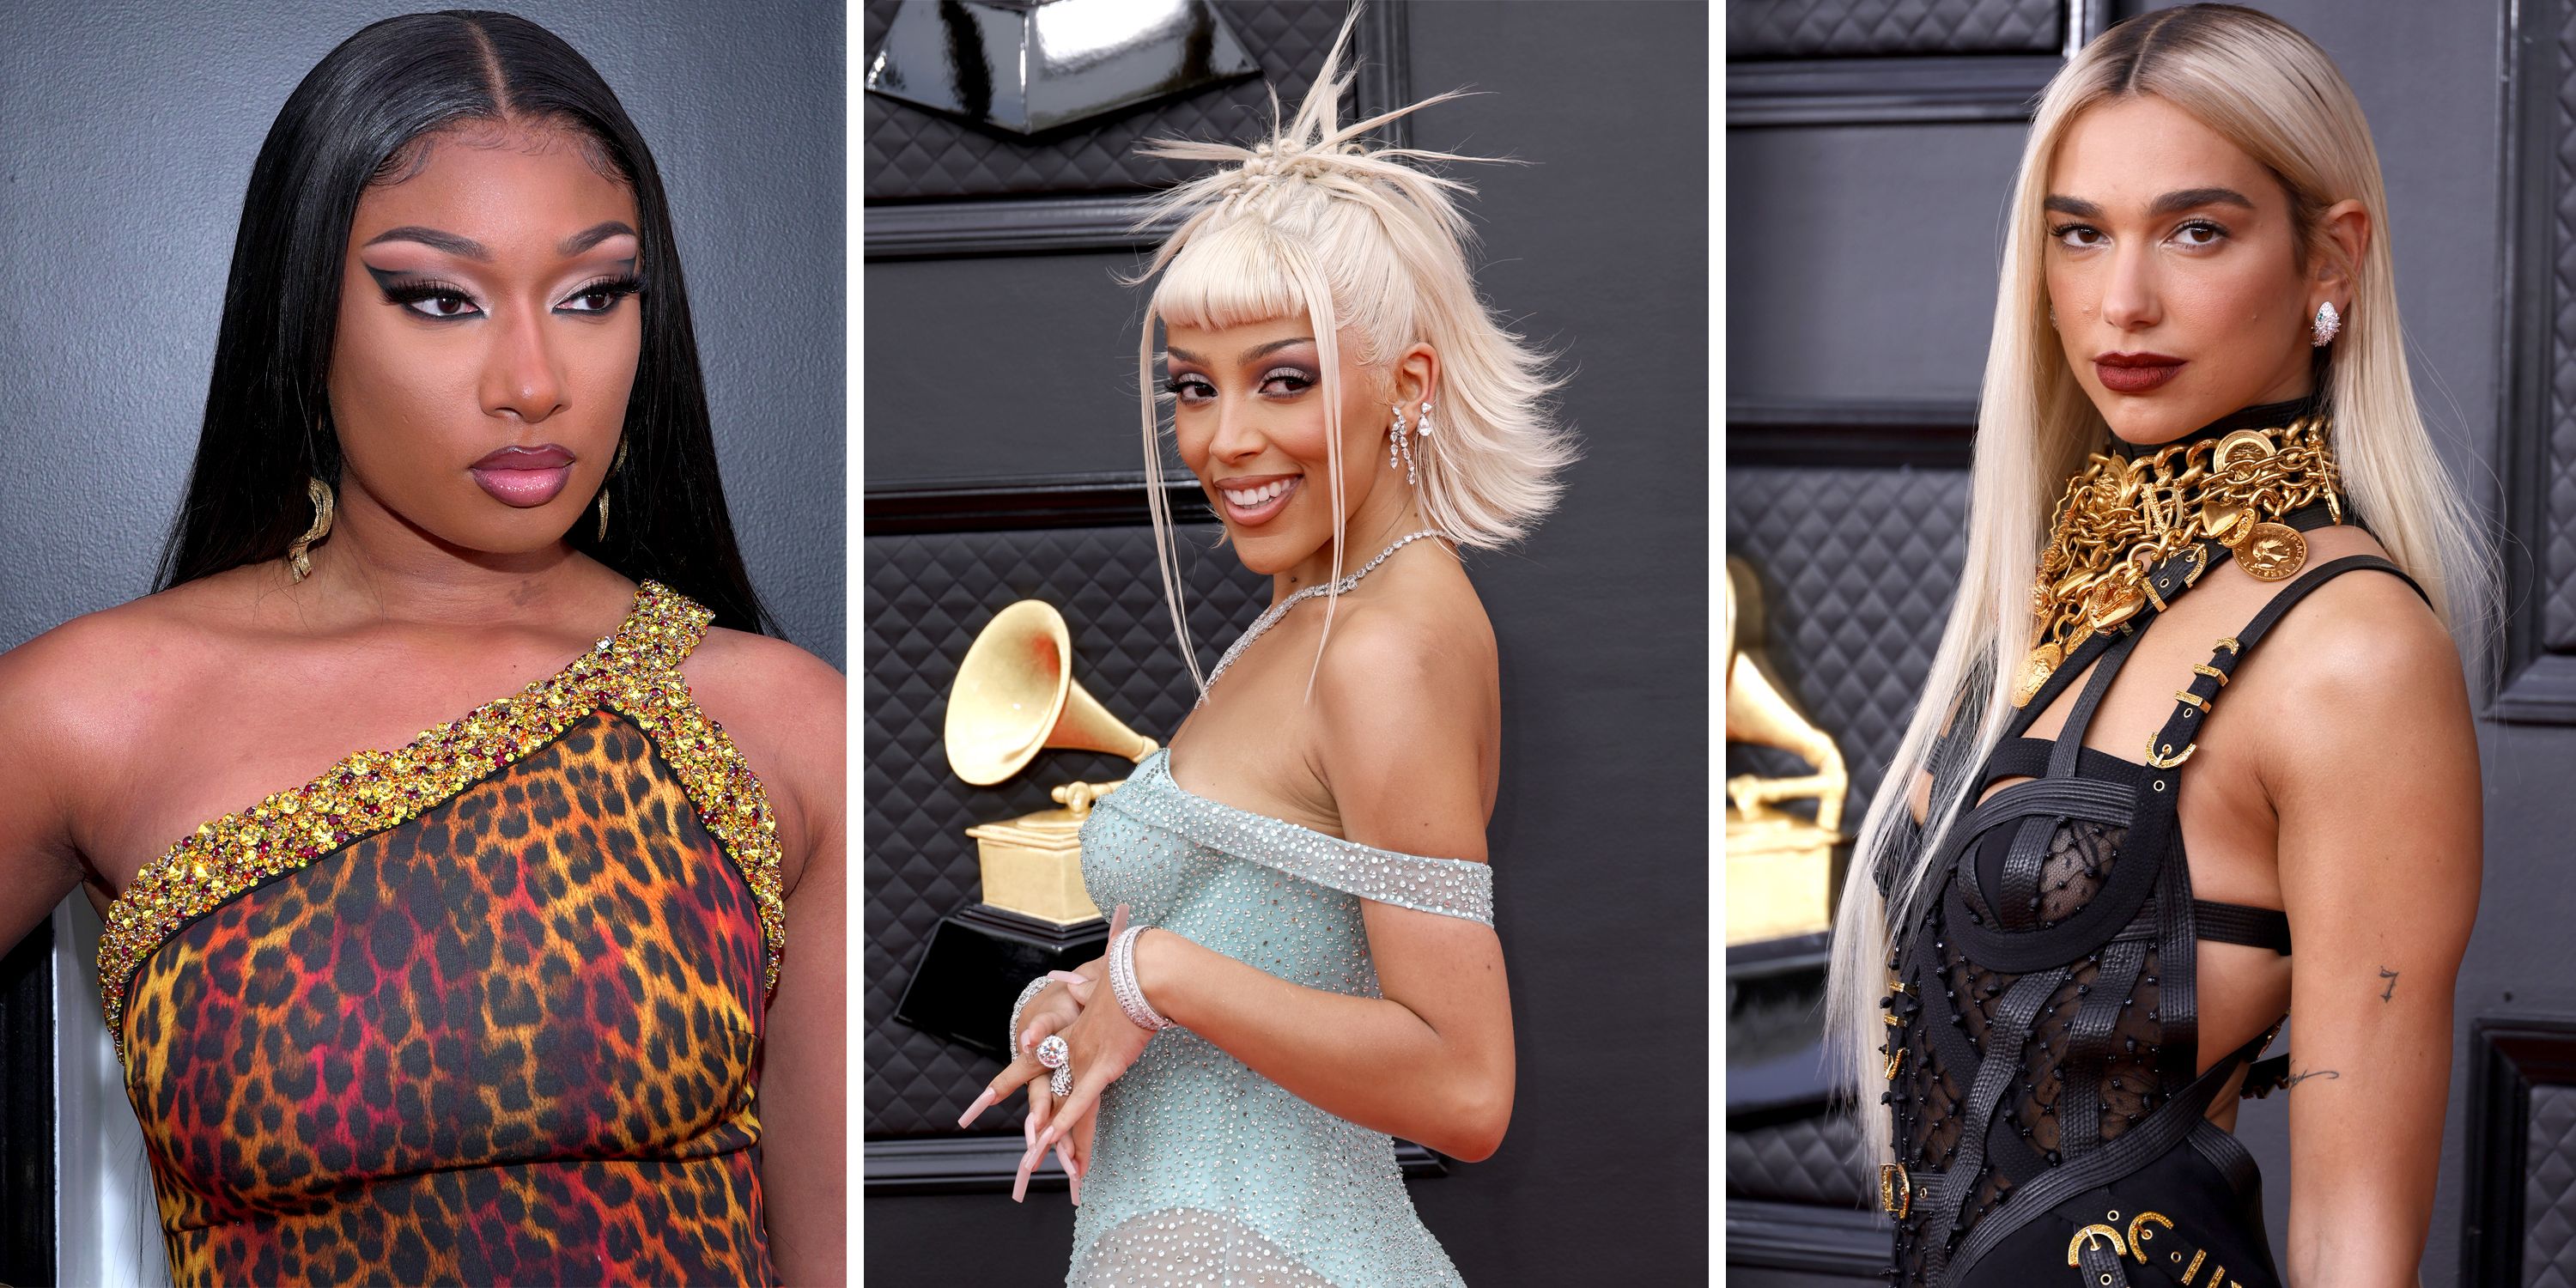 Grammys 2022: The Best Hair and Makeup Looks From the Red Carpet